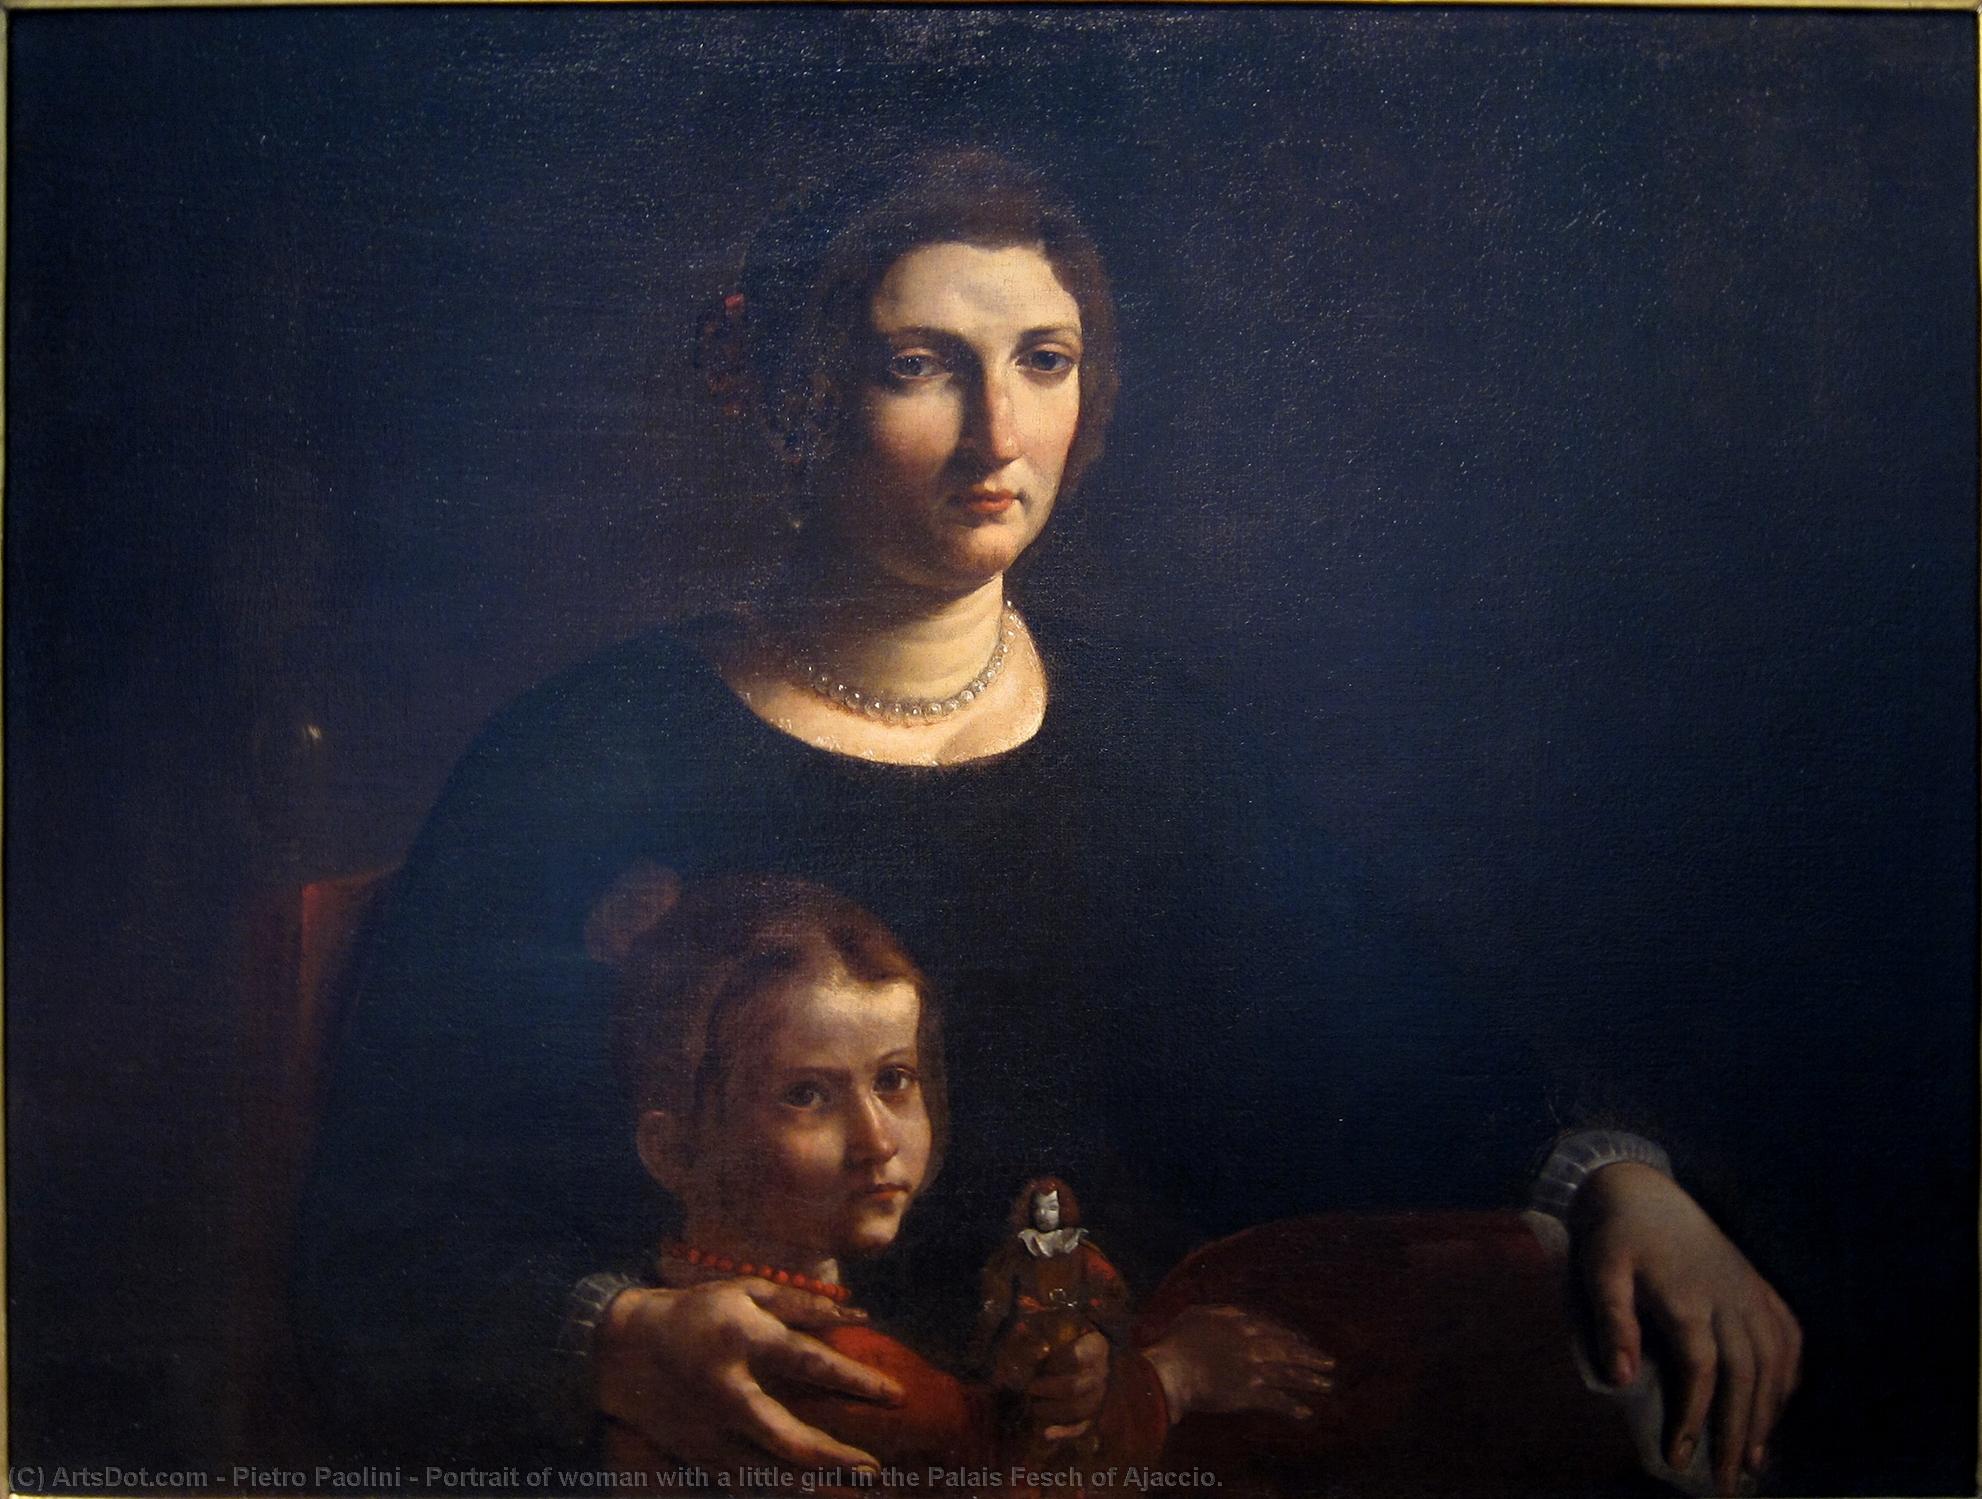 Buy Museum Art Reproductions Portrait of woman with a little girl in the Palais Fesch of Ajaccio. by Pietro Paolini (1603-1681, Italy) | ArtsDot.com